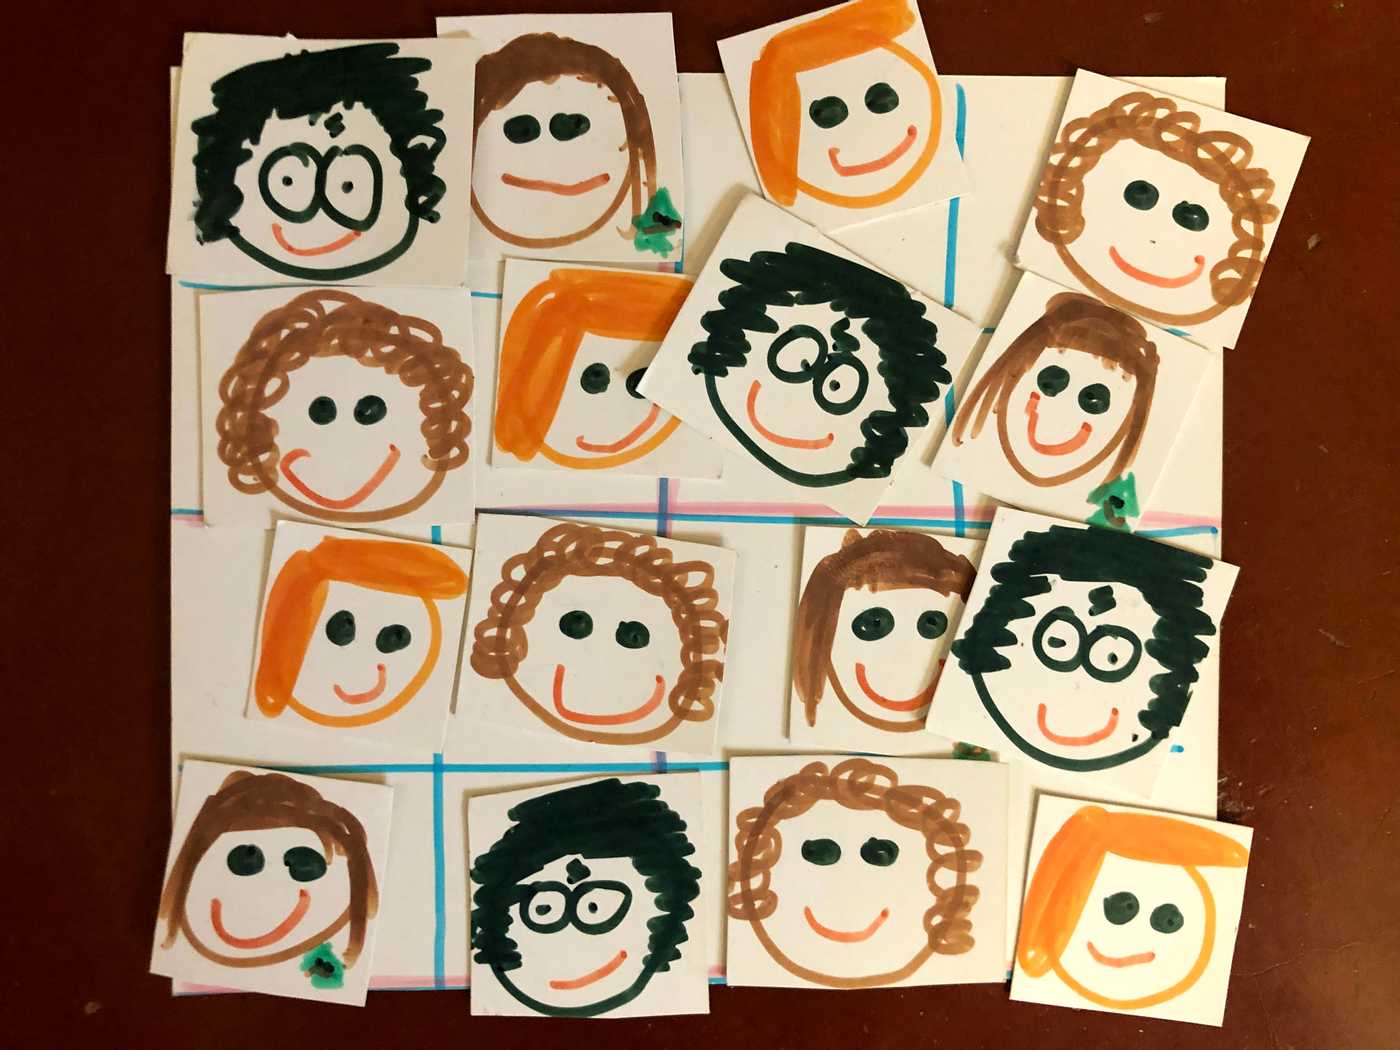 I drew a 4x4 Soduku and cut out the shapes of Harry Potter characters -- Harry, Hermione, Ron and Neville.